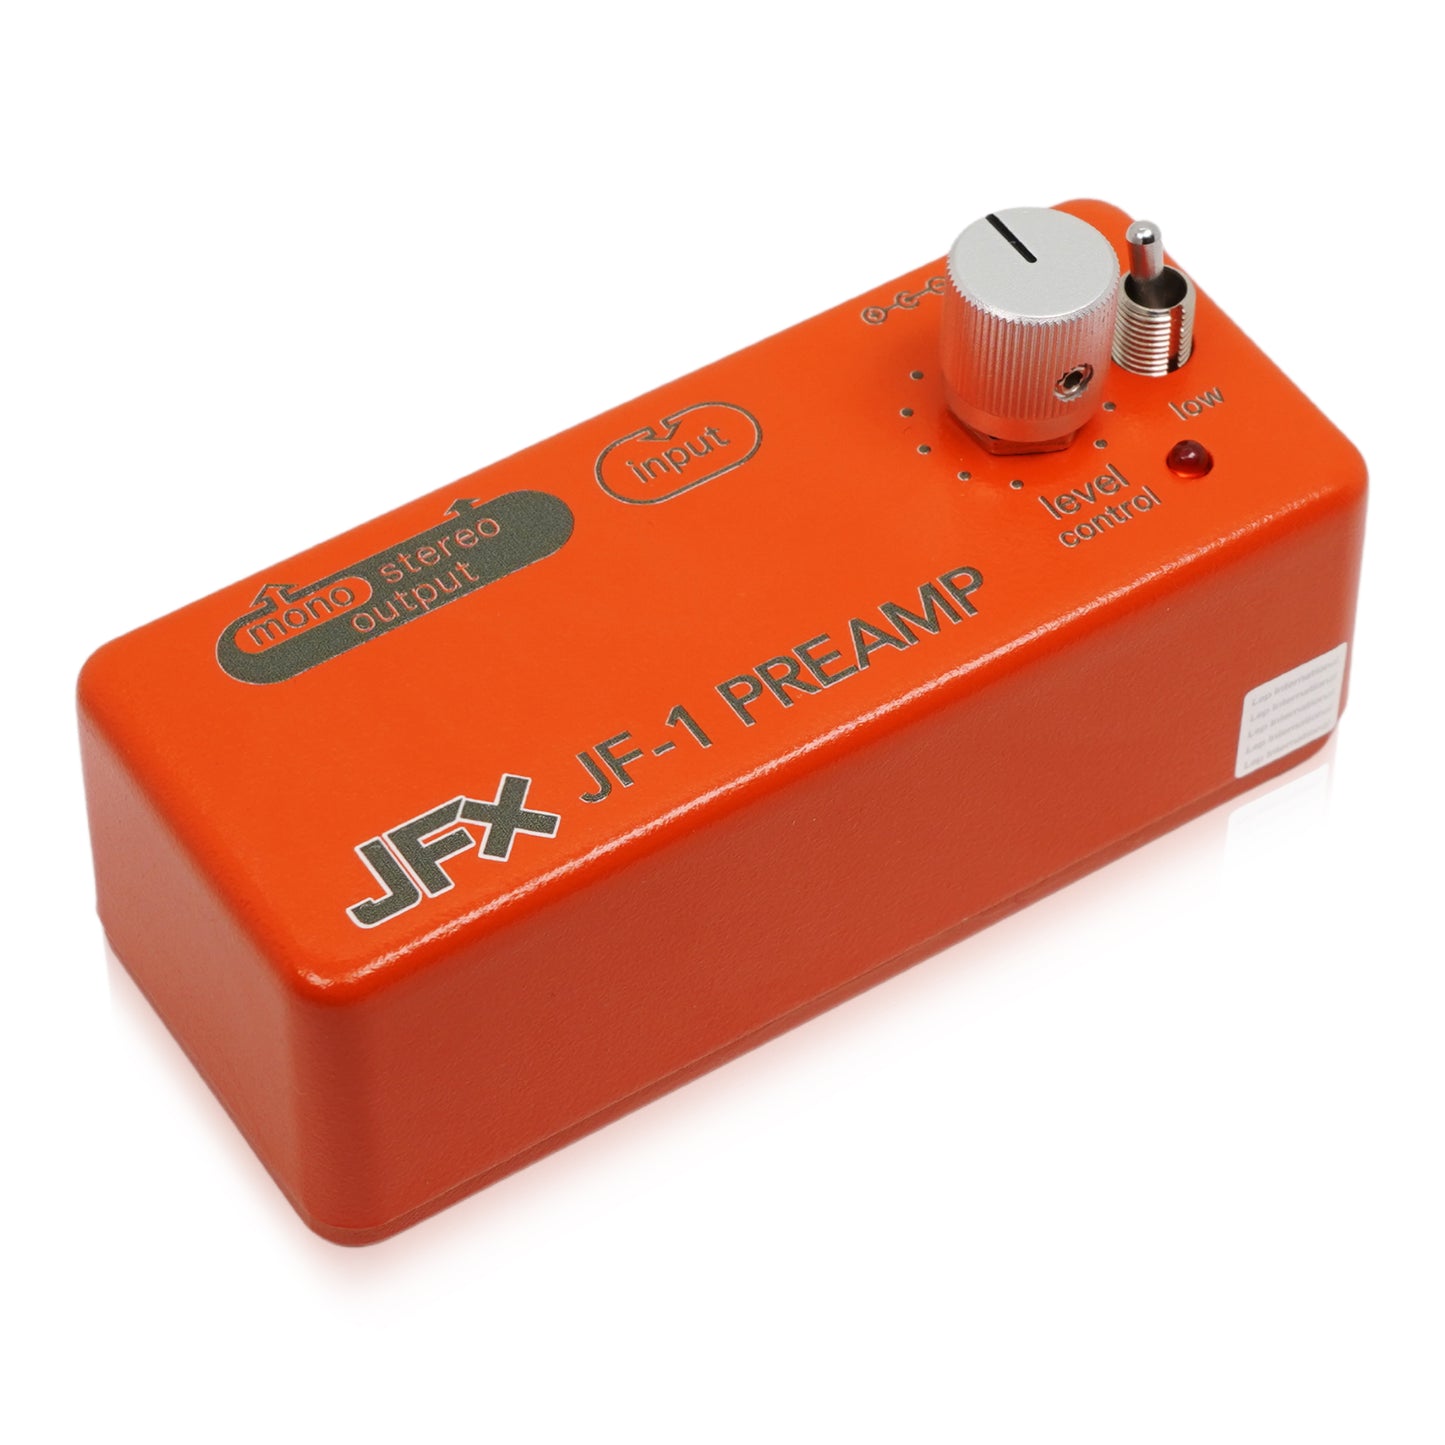 JFX Pedals　JF-1 Preamp　/ プリアンプ ブースター ギター エフェクター